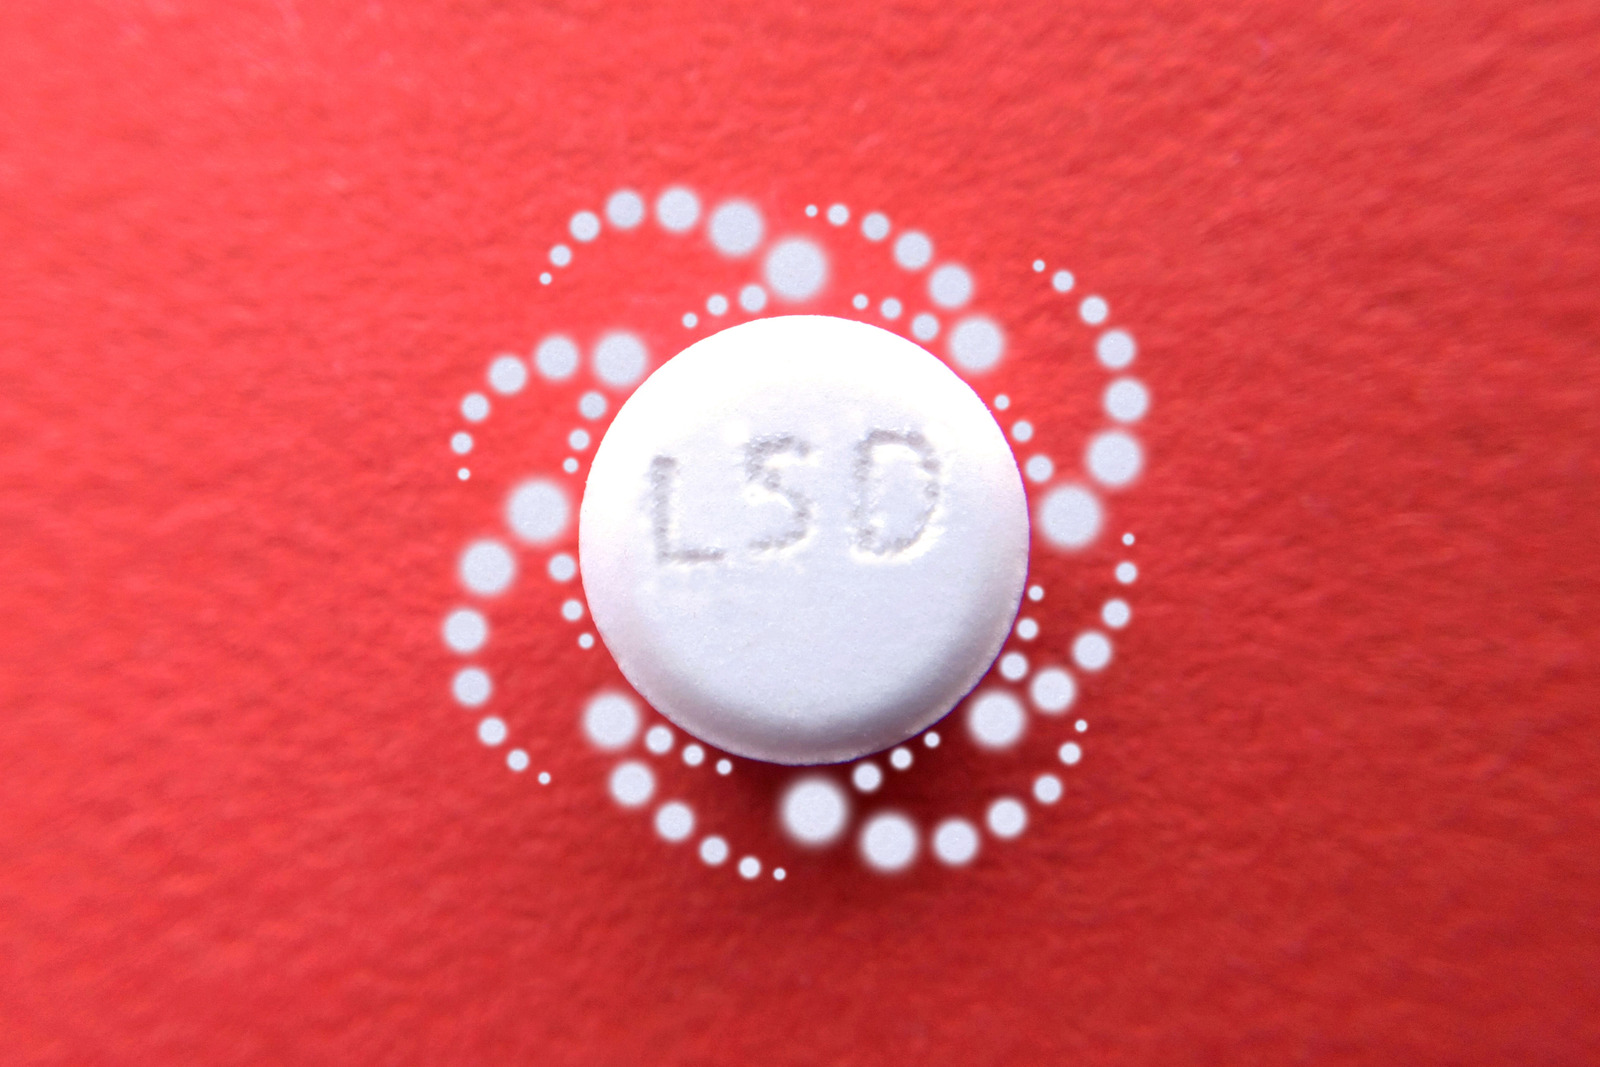 side effects and symptoms of lsd use